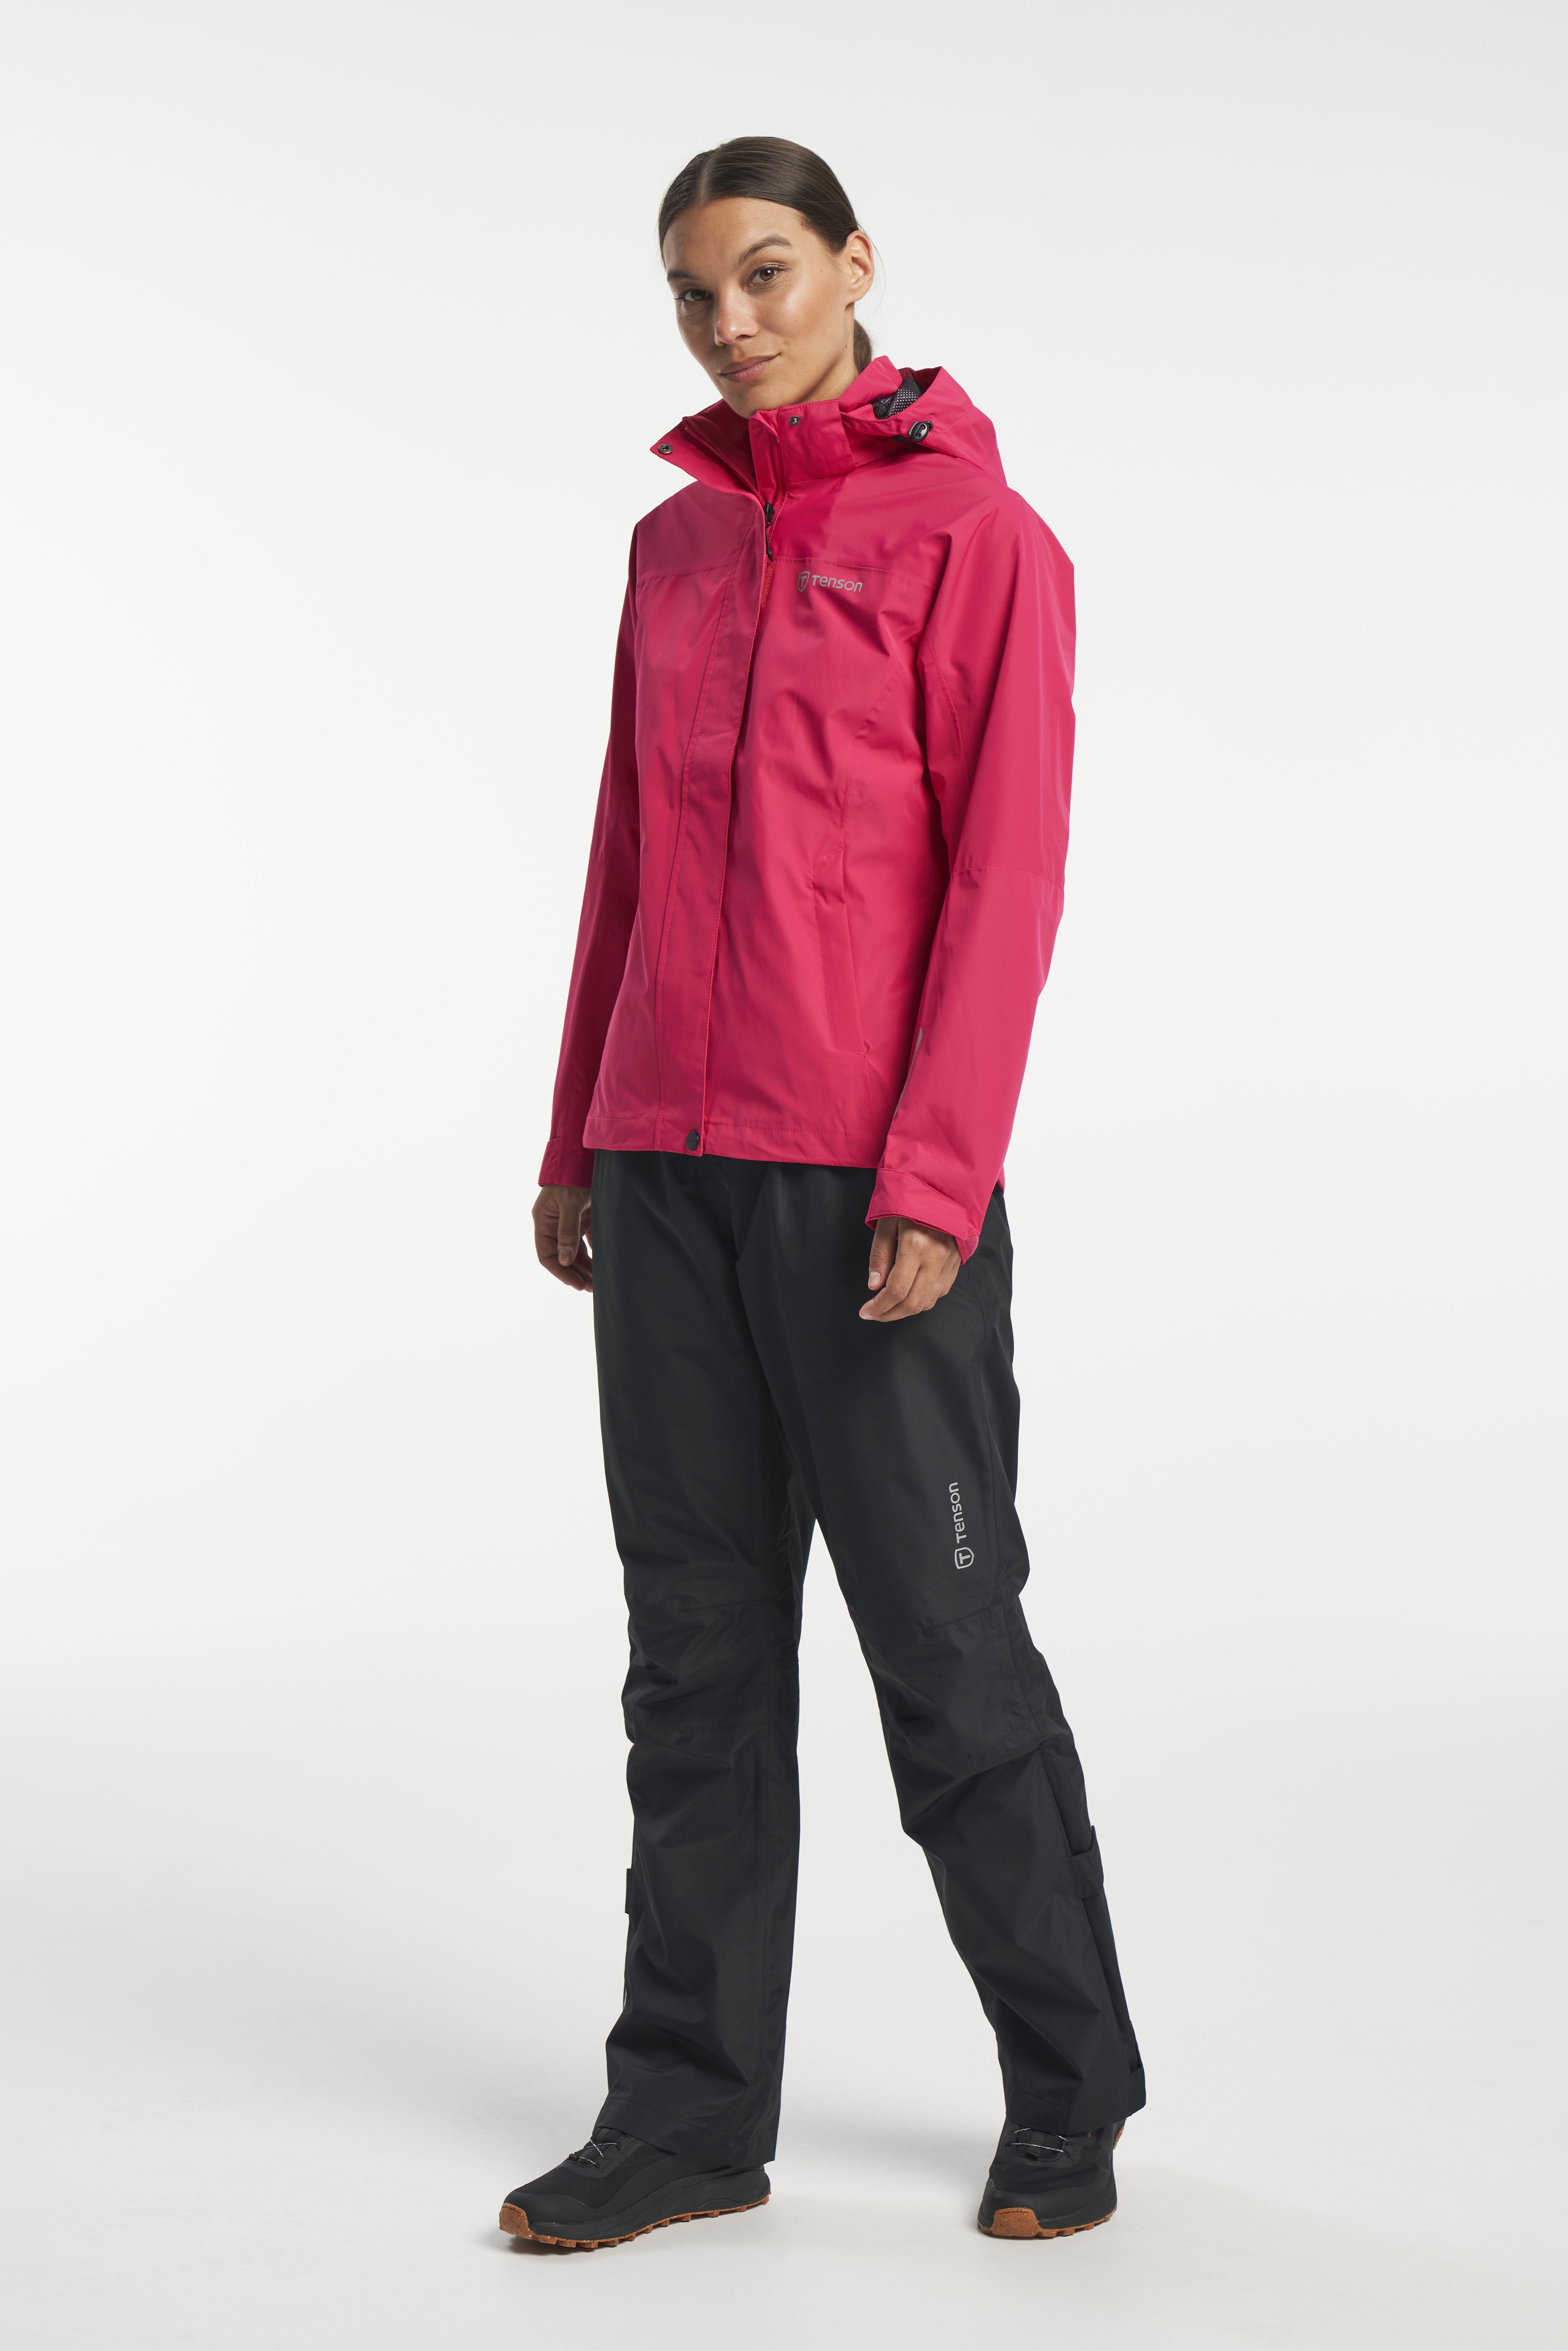 Waterproof Pants for Men  Women  The North Face